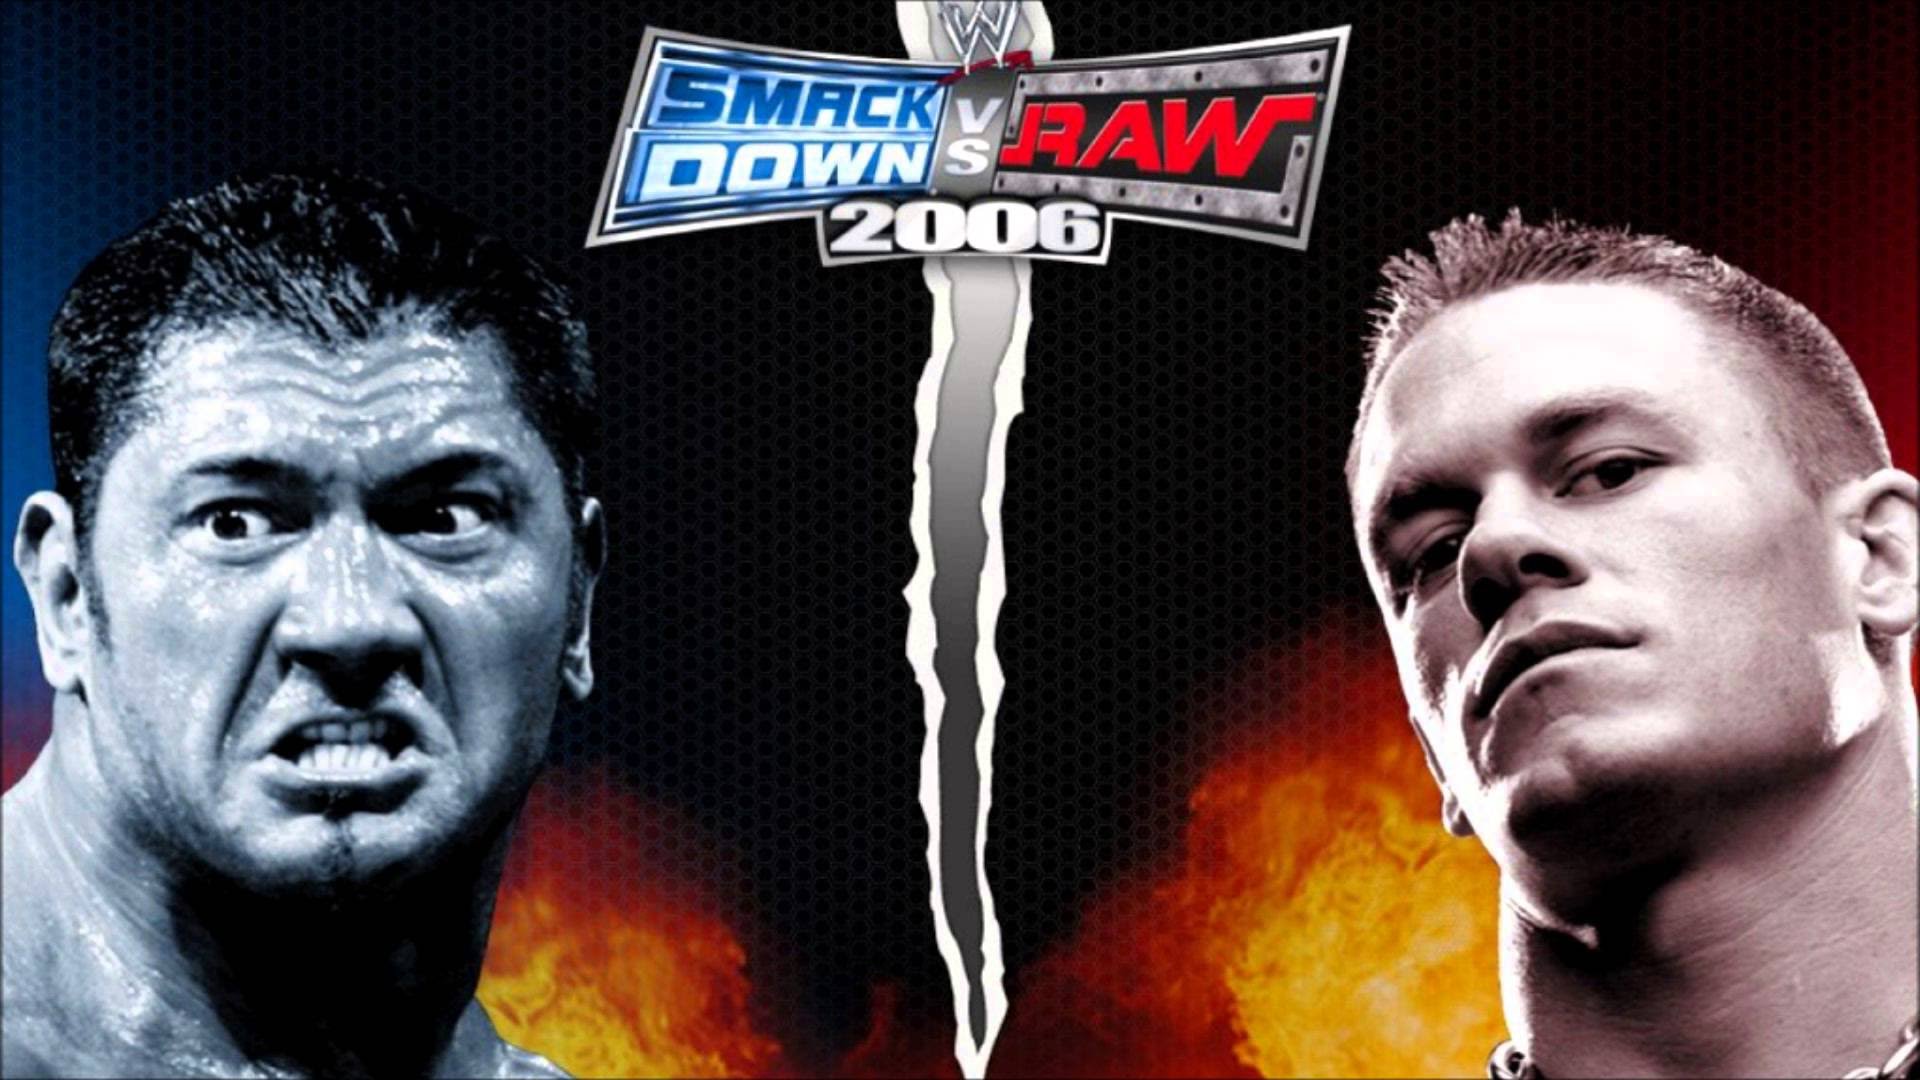 Wwe Smackdown Vs Raw 06 Details Launchbox Games Database